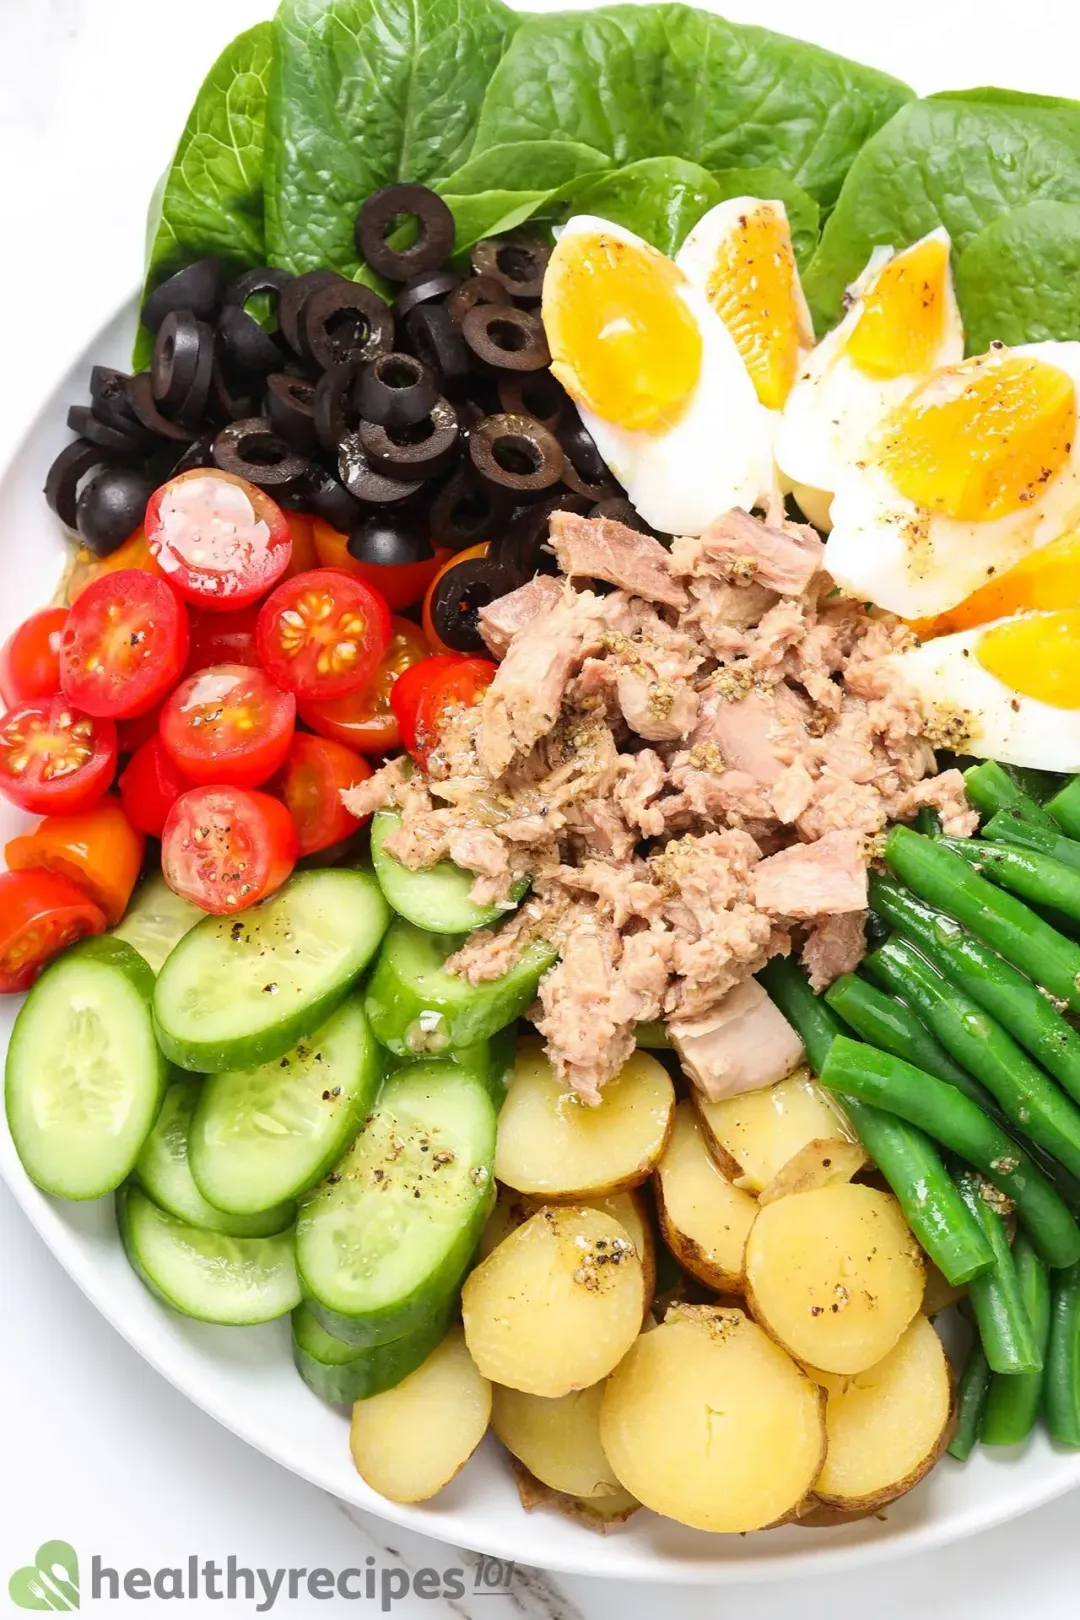 A homemade Nicoise salad with tuna, boiled eggs, olives, green beans, tomatoes, and potatoes on a white plate.